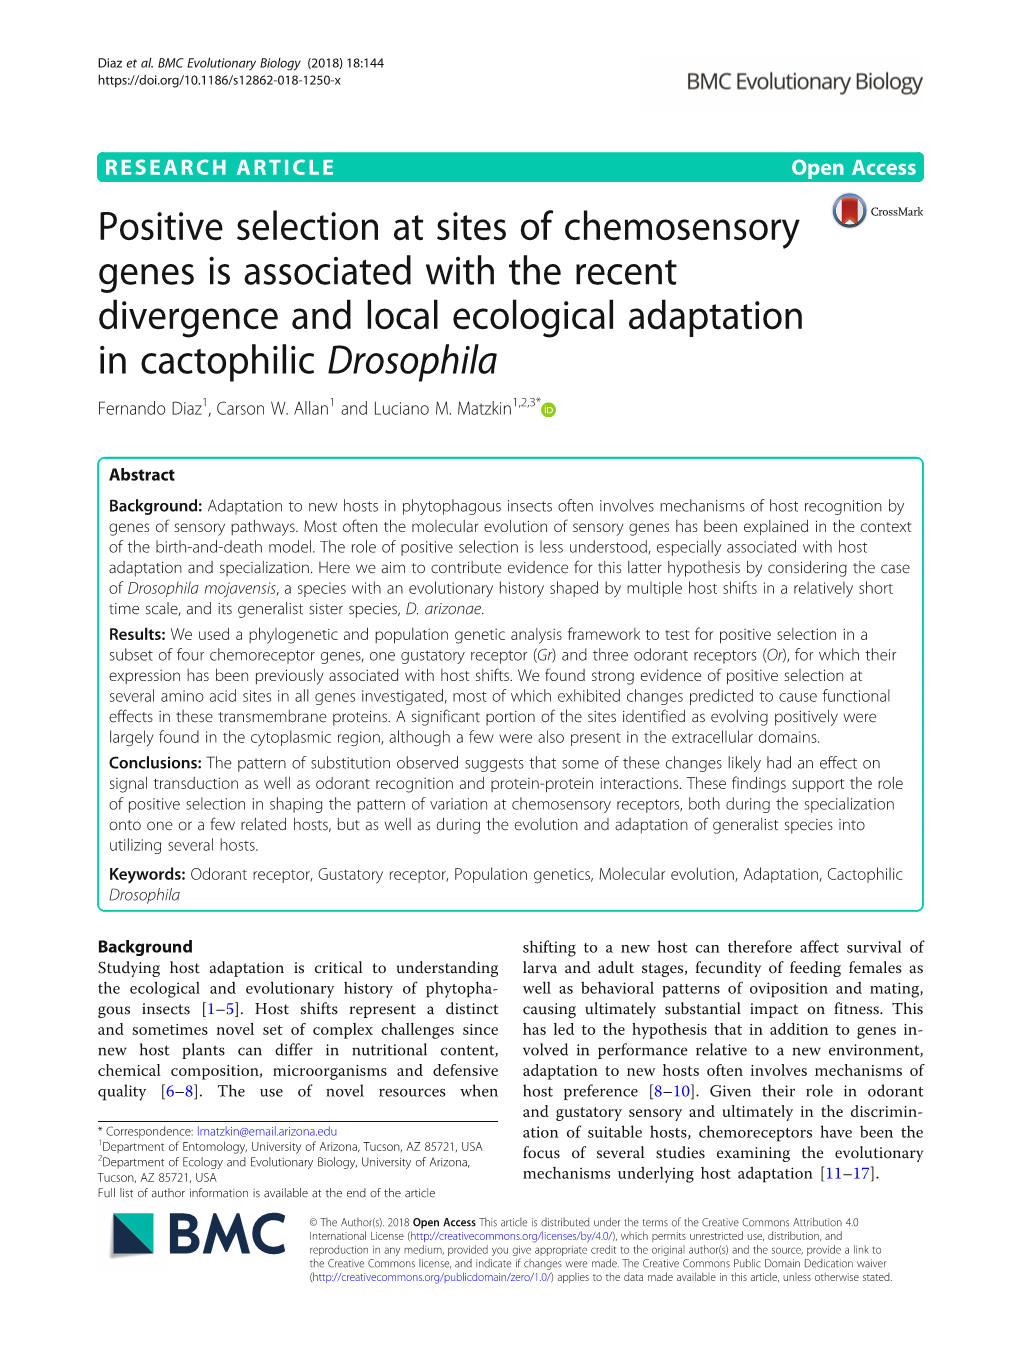 Positive Selection at Sites of Chemosensory Genes Is Associated With